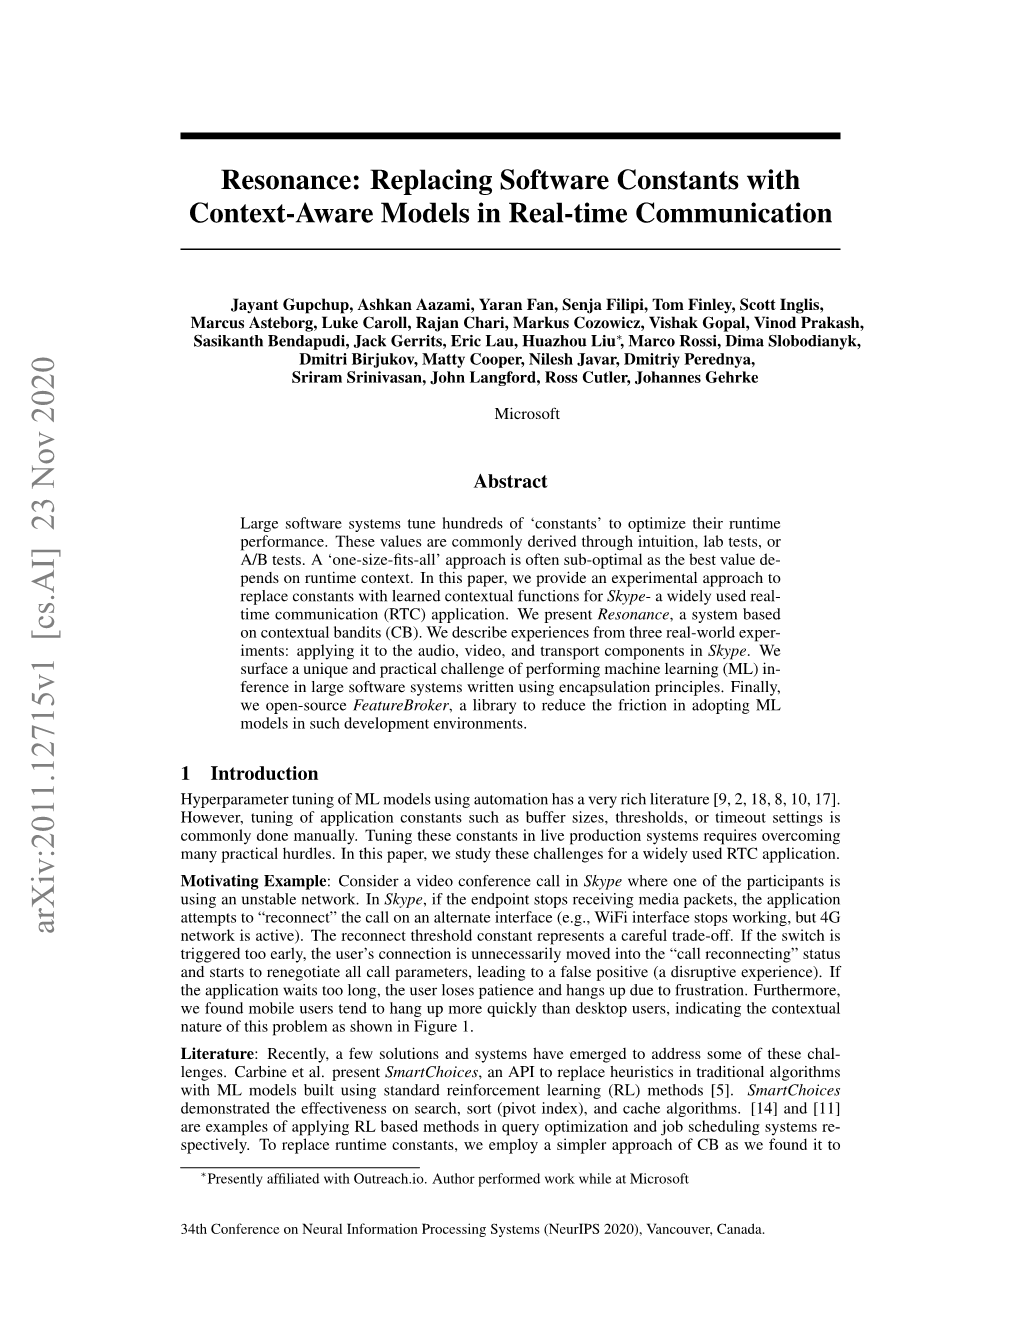 Resonance: Replacing Software Constants with Context-Aware Models in Real-Time Communication